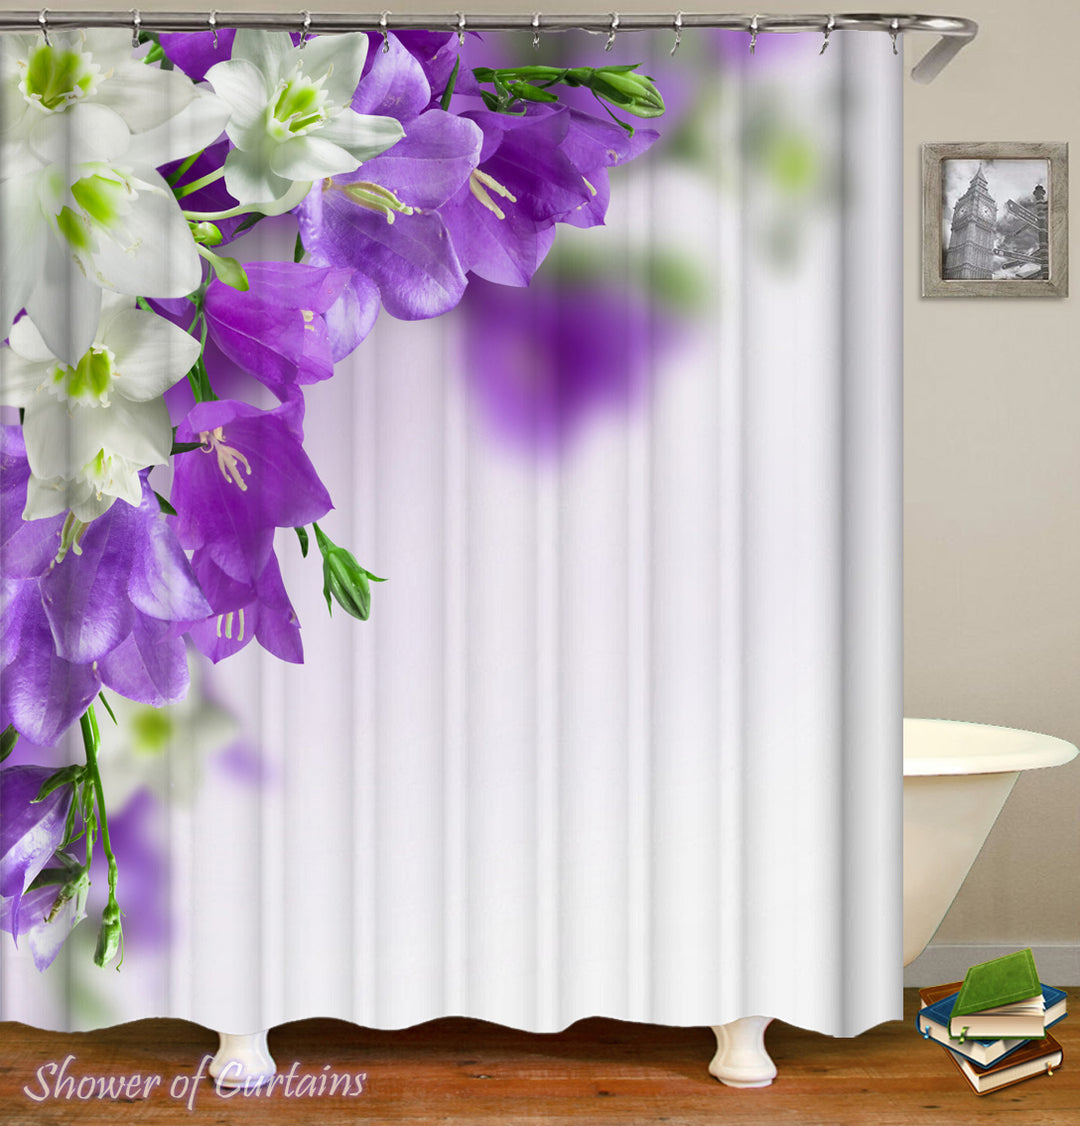 Shower Curtain of Purple And White Flowers